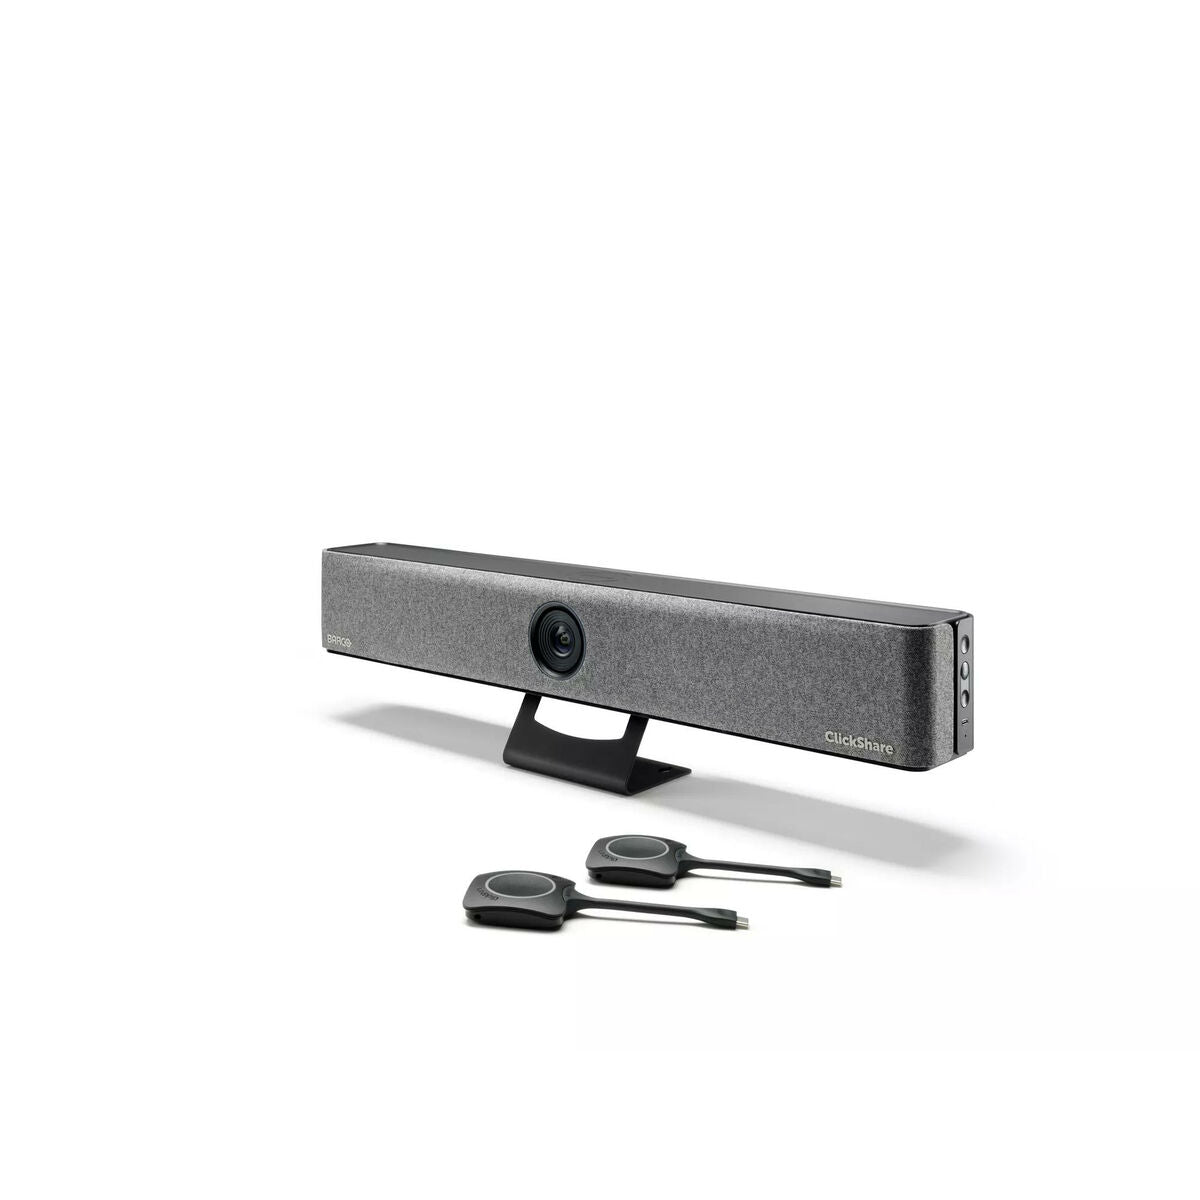 Video Conferencing System Barco ClickShare 4K Ultra HD, Barco, Computing, Accessories, video-conferencing-system-barco-clickshare-4k-ultra-hd, Brand_Barco, category-reference-2609, category-reference-2642, category-reference-2844, category-reference-t-19685, category-reference-t-19908, category-reference-t-21340, category-reference-t-25568, computers / peripherals, Condition_NEW, office, Price_+ 1000, Teleworking, RiotNook